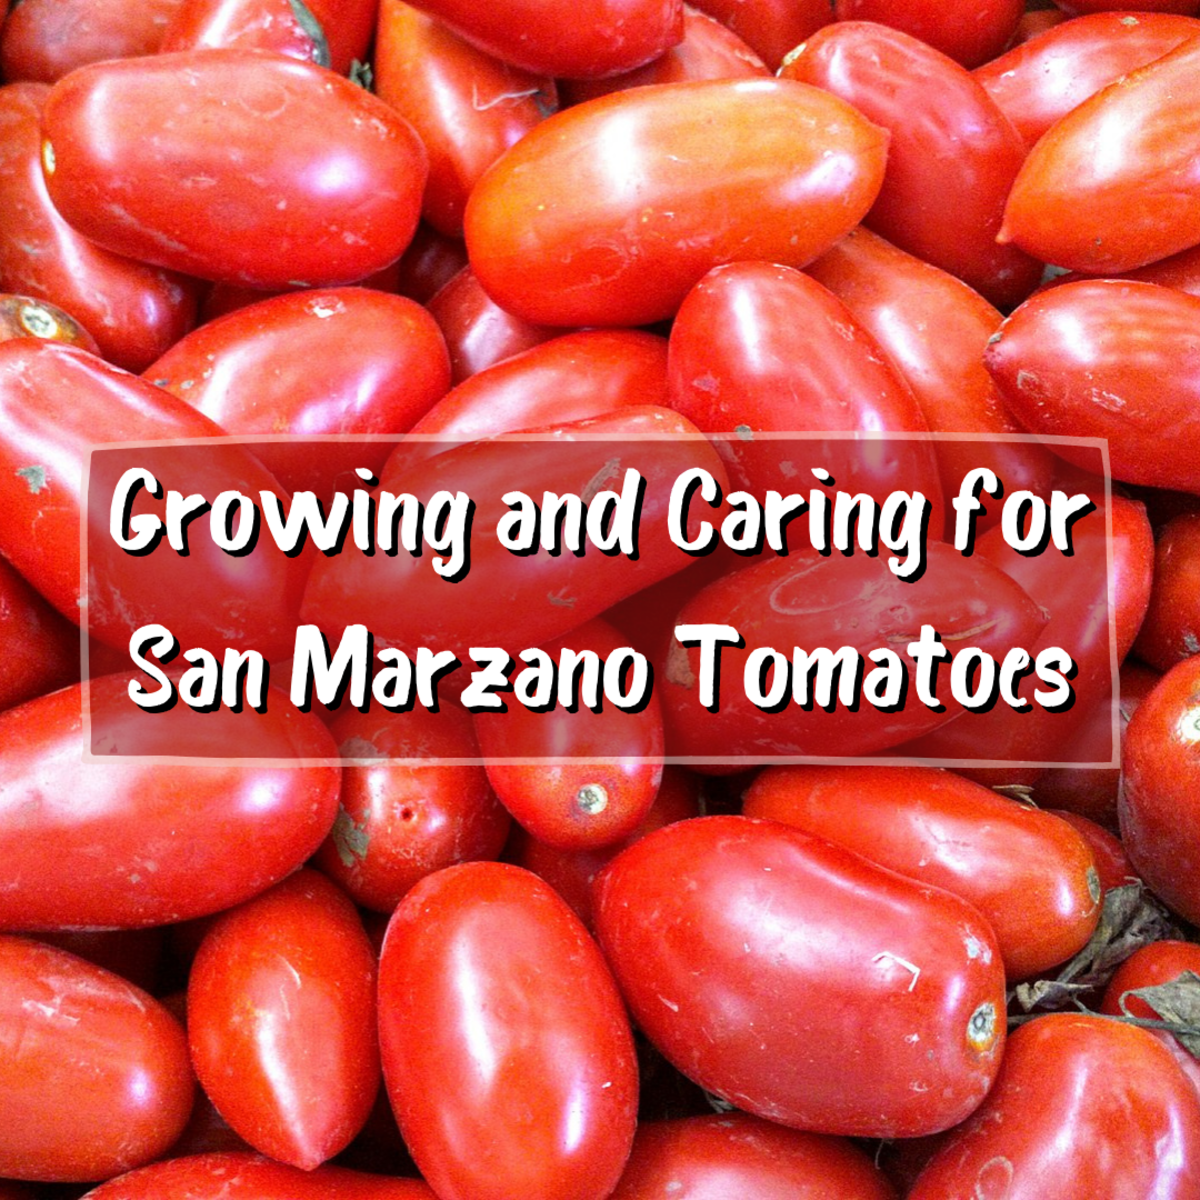 How to Grow and Care for San Marzano Tomato Plants